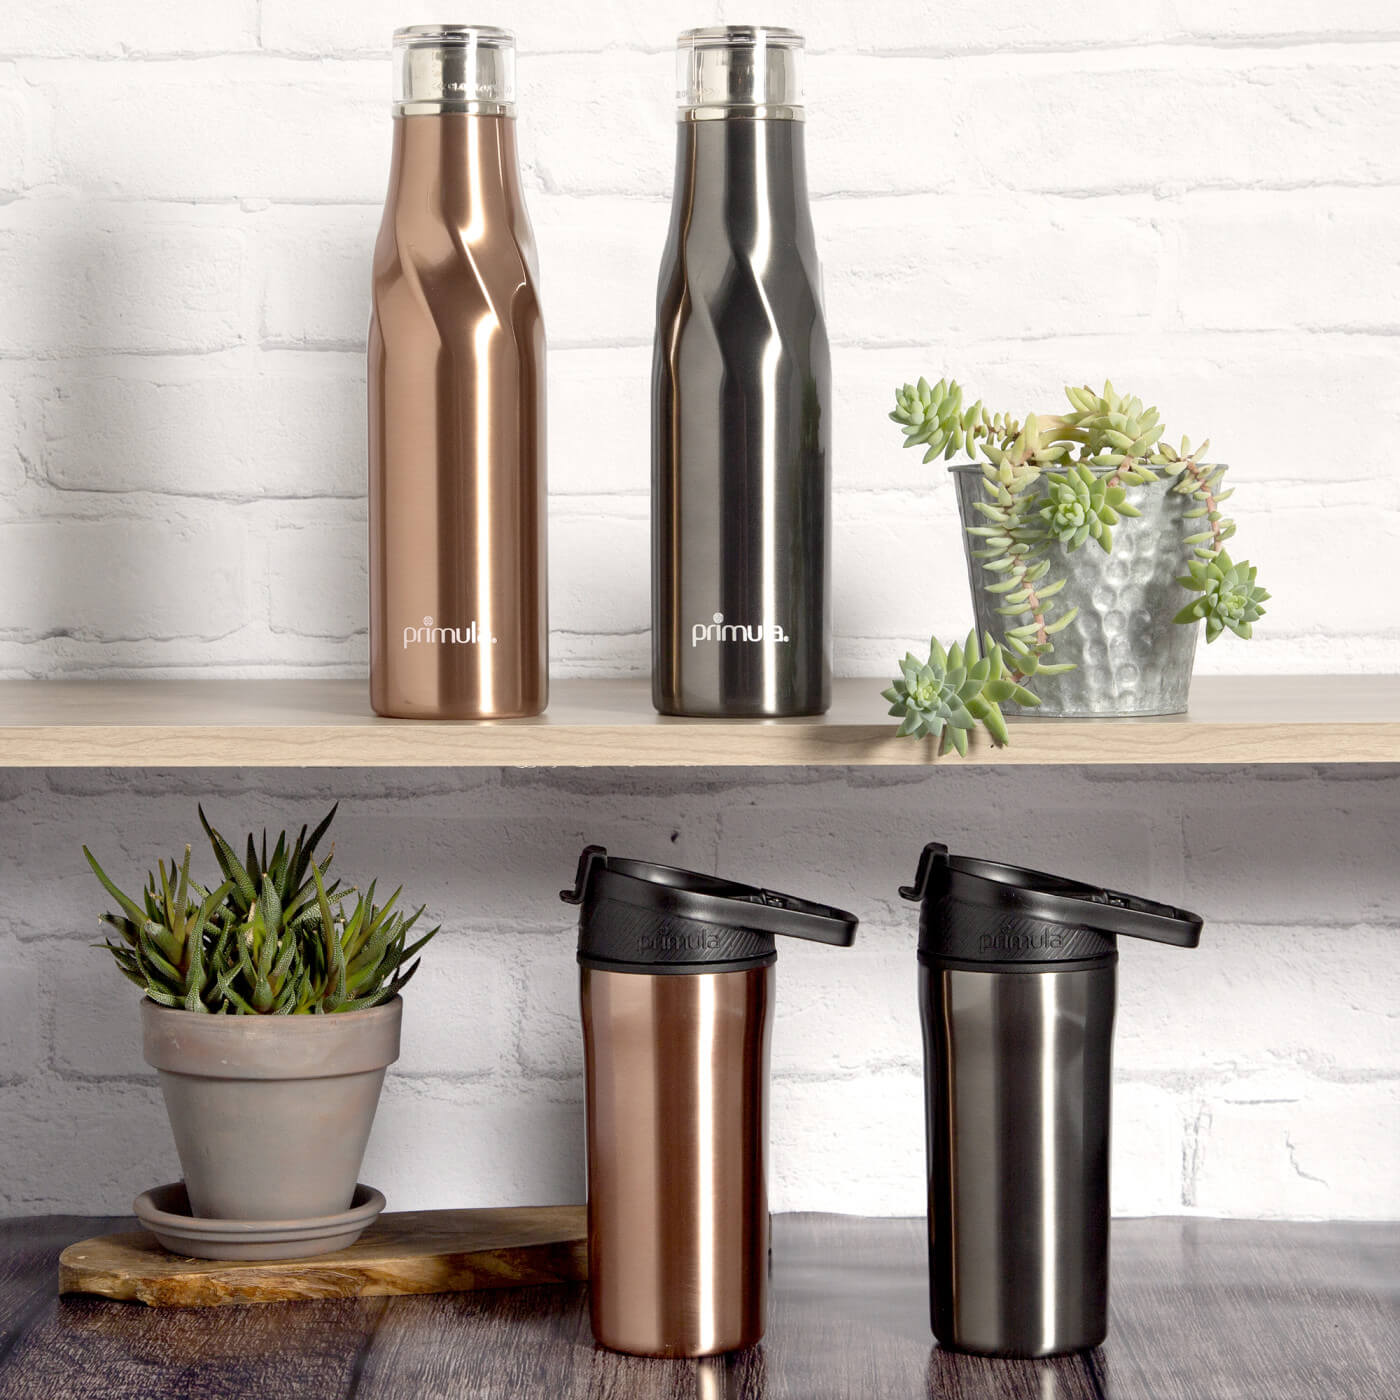 The Best Insulated Tumblers To Keep Your Drinks At the Right